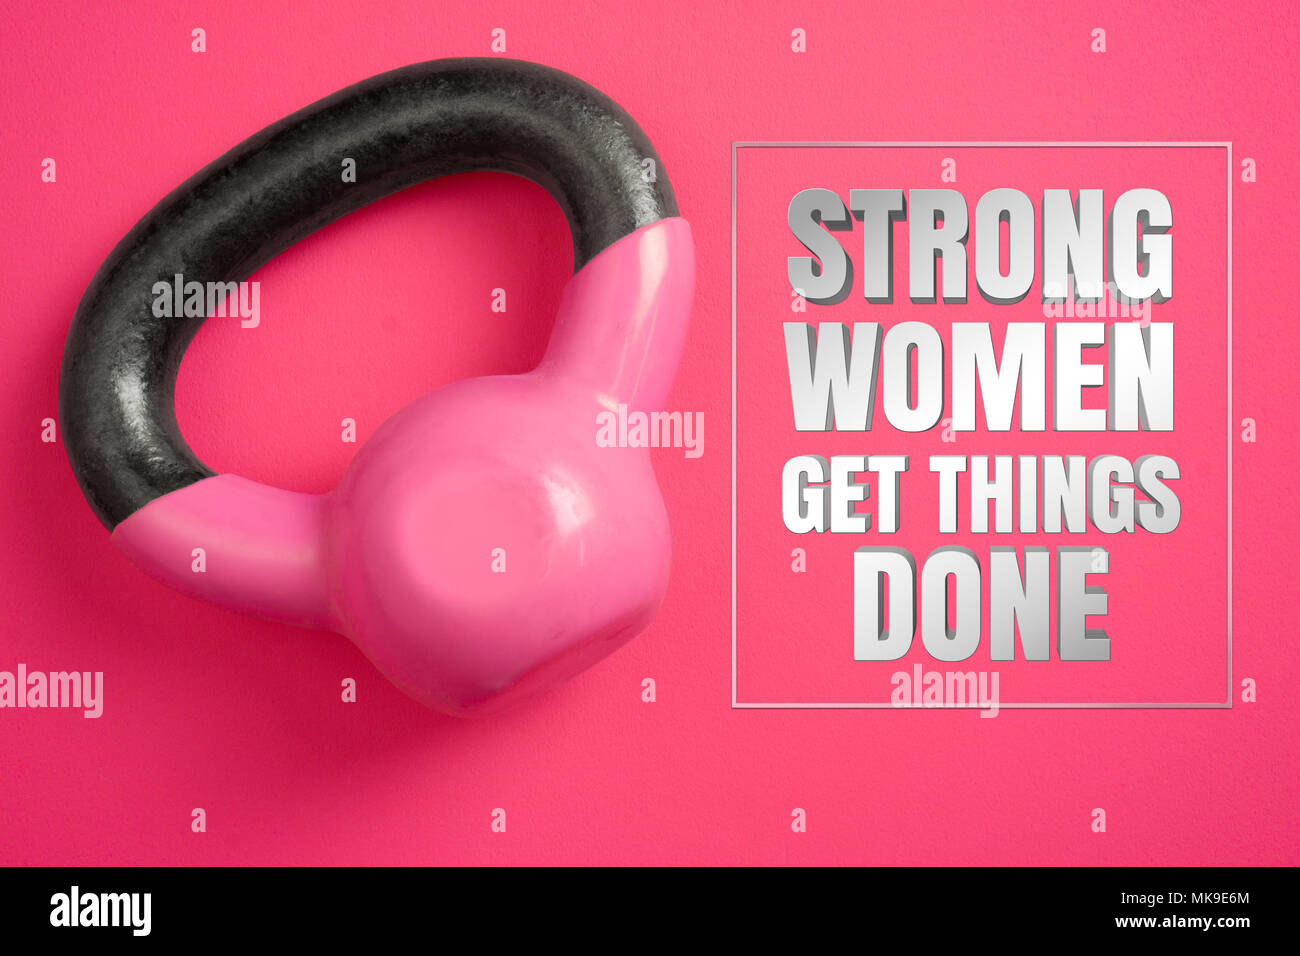 Strong women get things done. Inspirational quote with women's kettle weights on pink background. Stock Photo